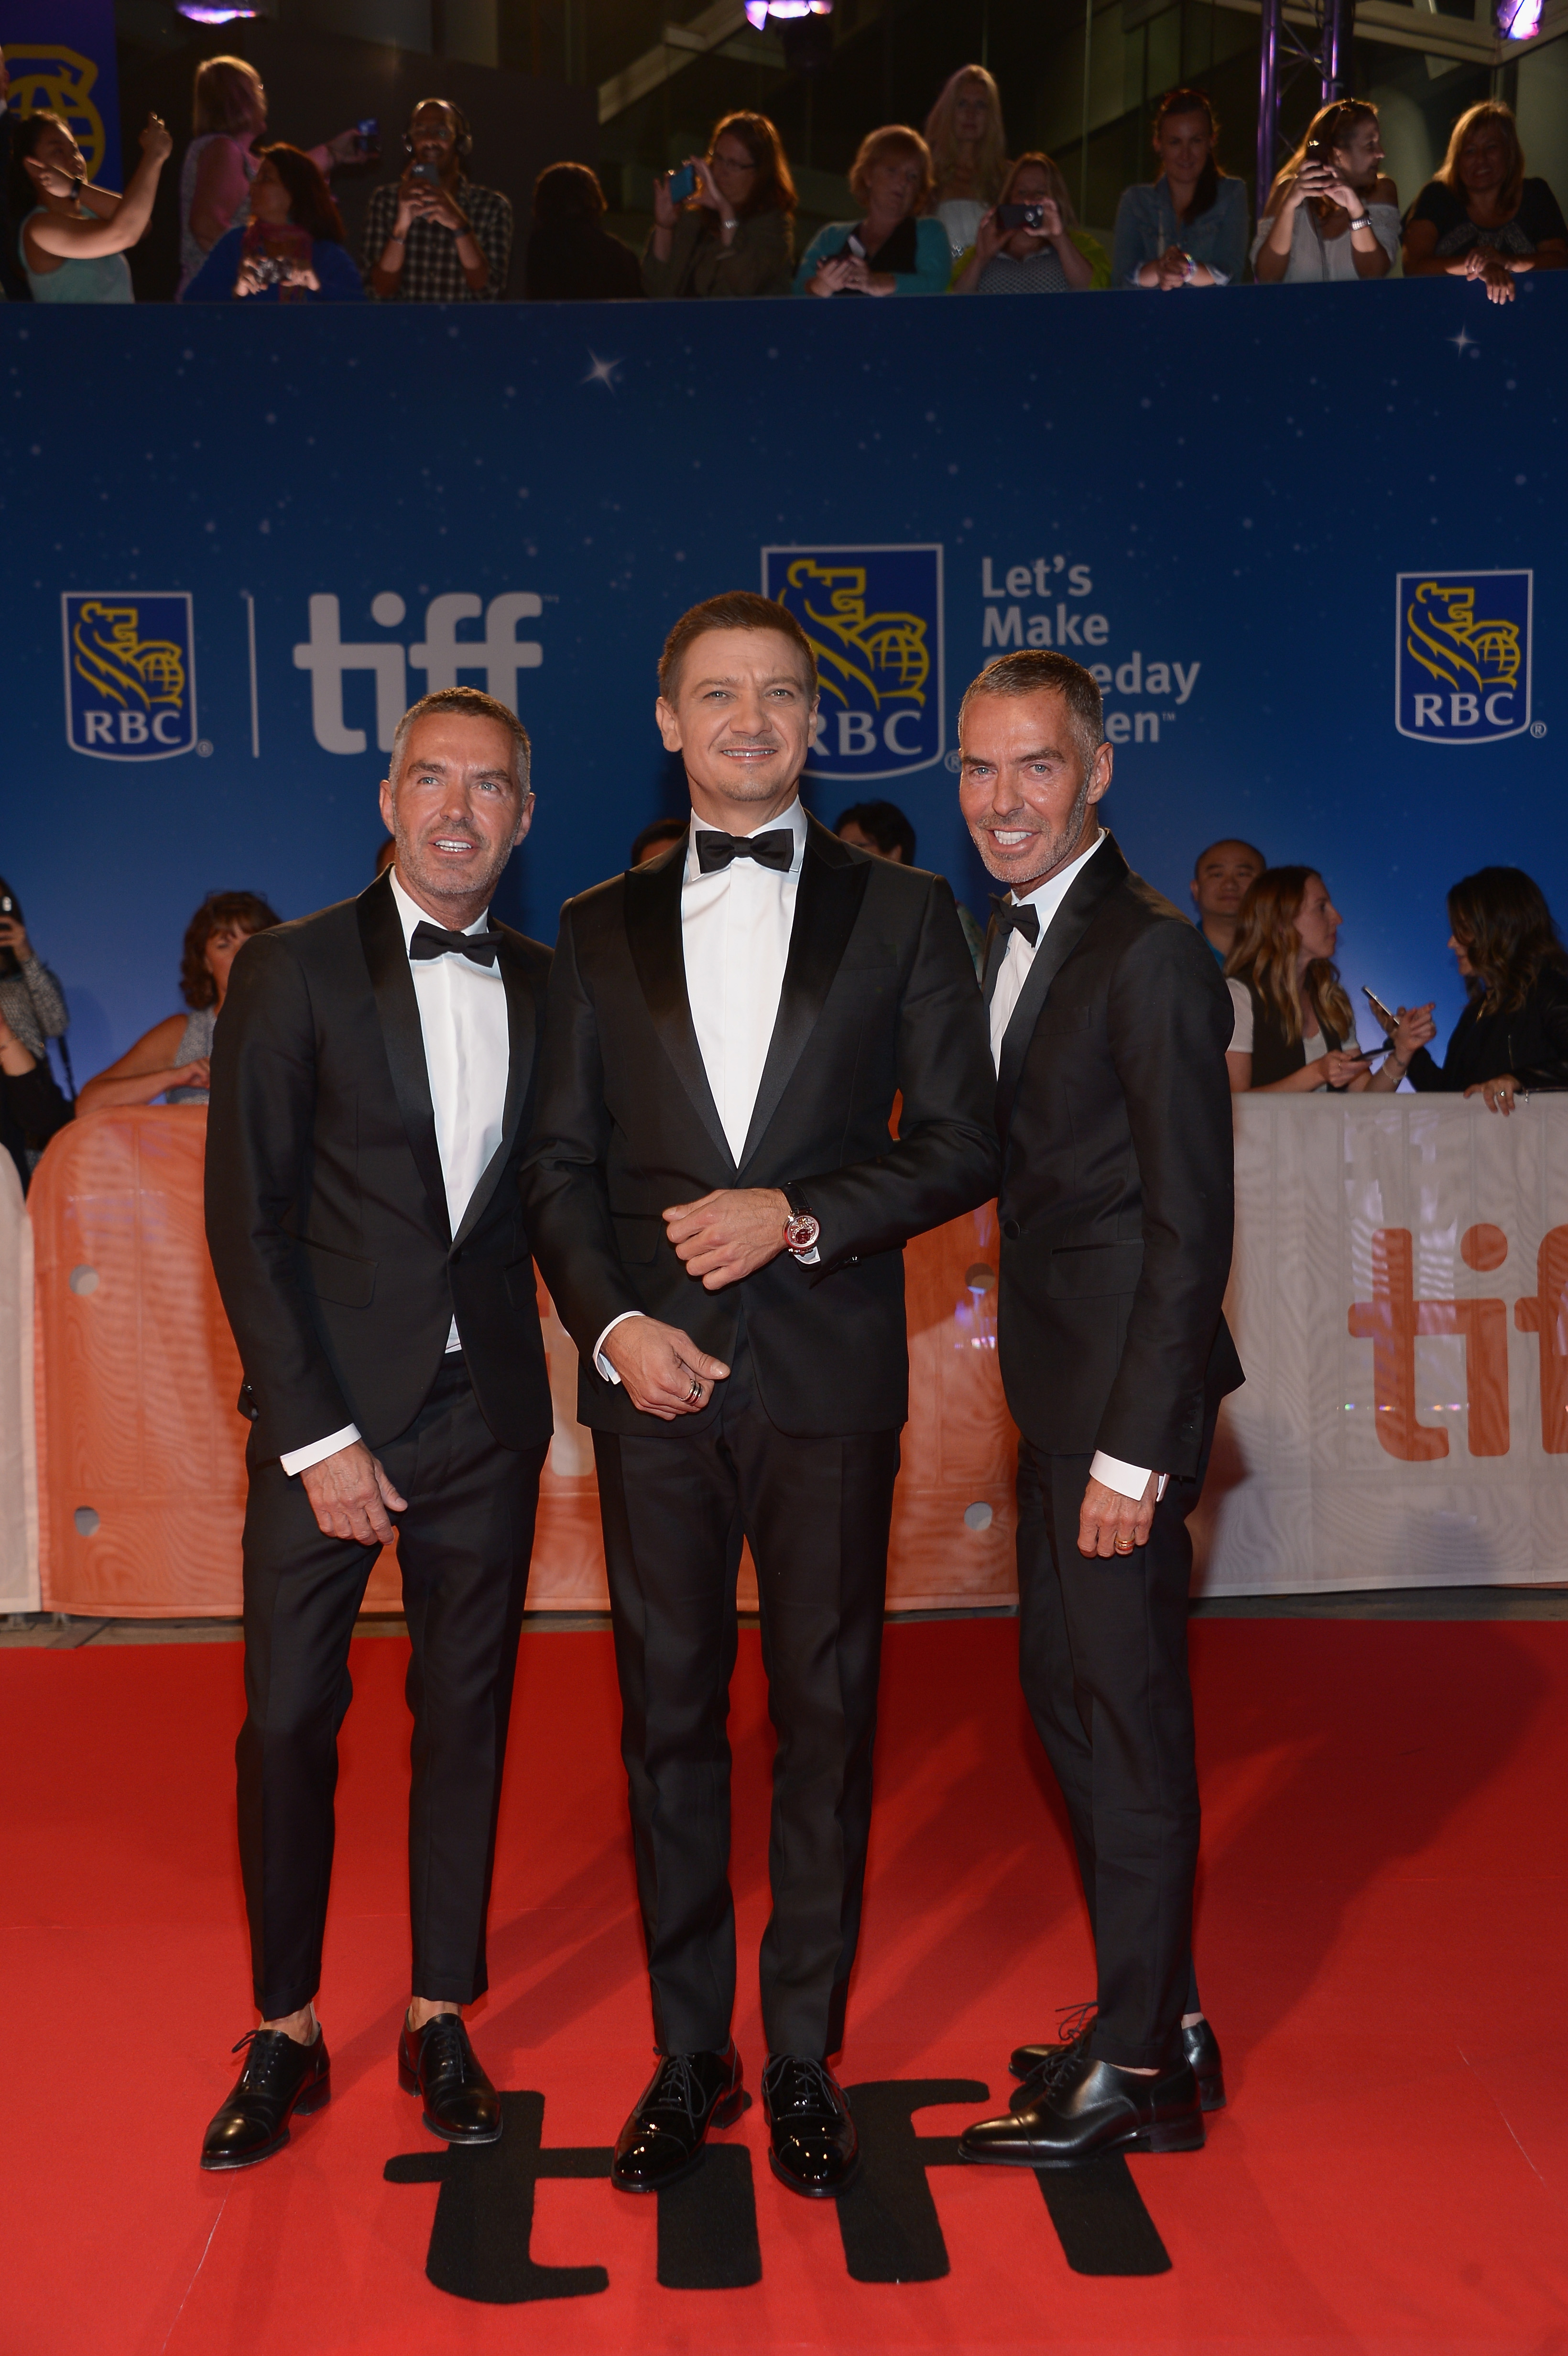 TORONTO, ON - SEPTEMBER 12:  Actor Jeremy Renner (C) with Dean Caten and Dan Caten at the "Arrival" premiere during the 2016 Toronto International Film Festival at Roy Thomson Hall on September 12, 2016 in Toronto, Canada.  (Photo by GP Images/WireImage)